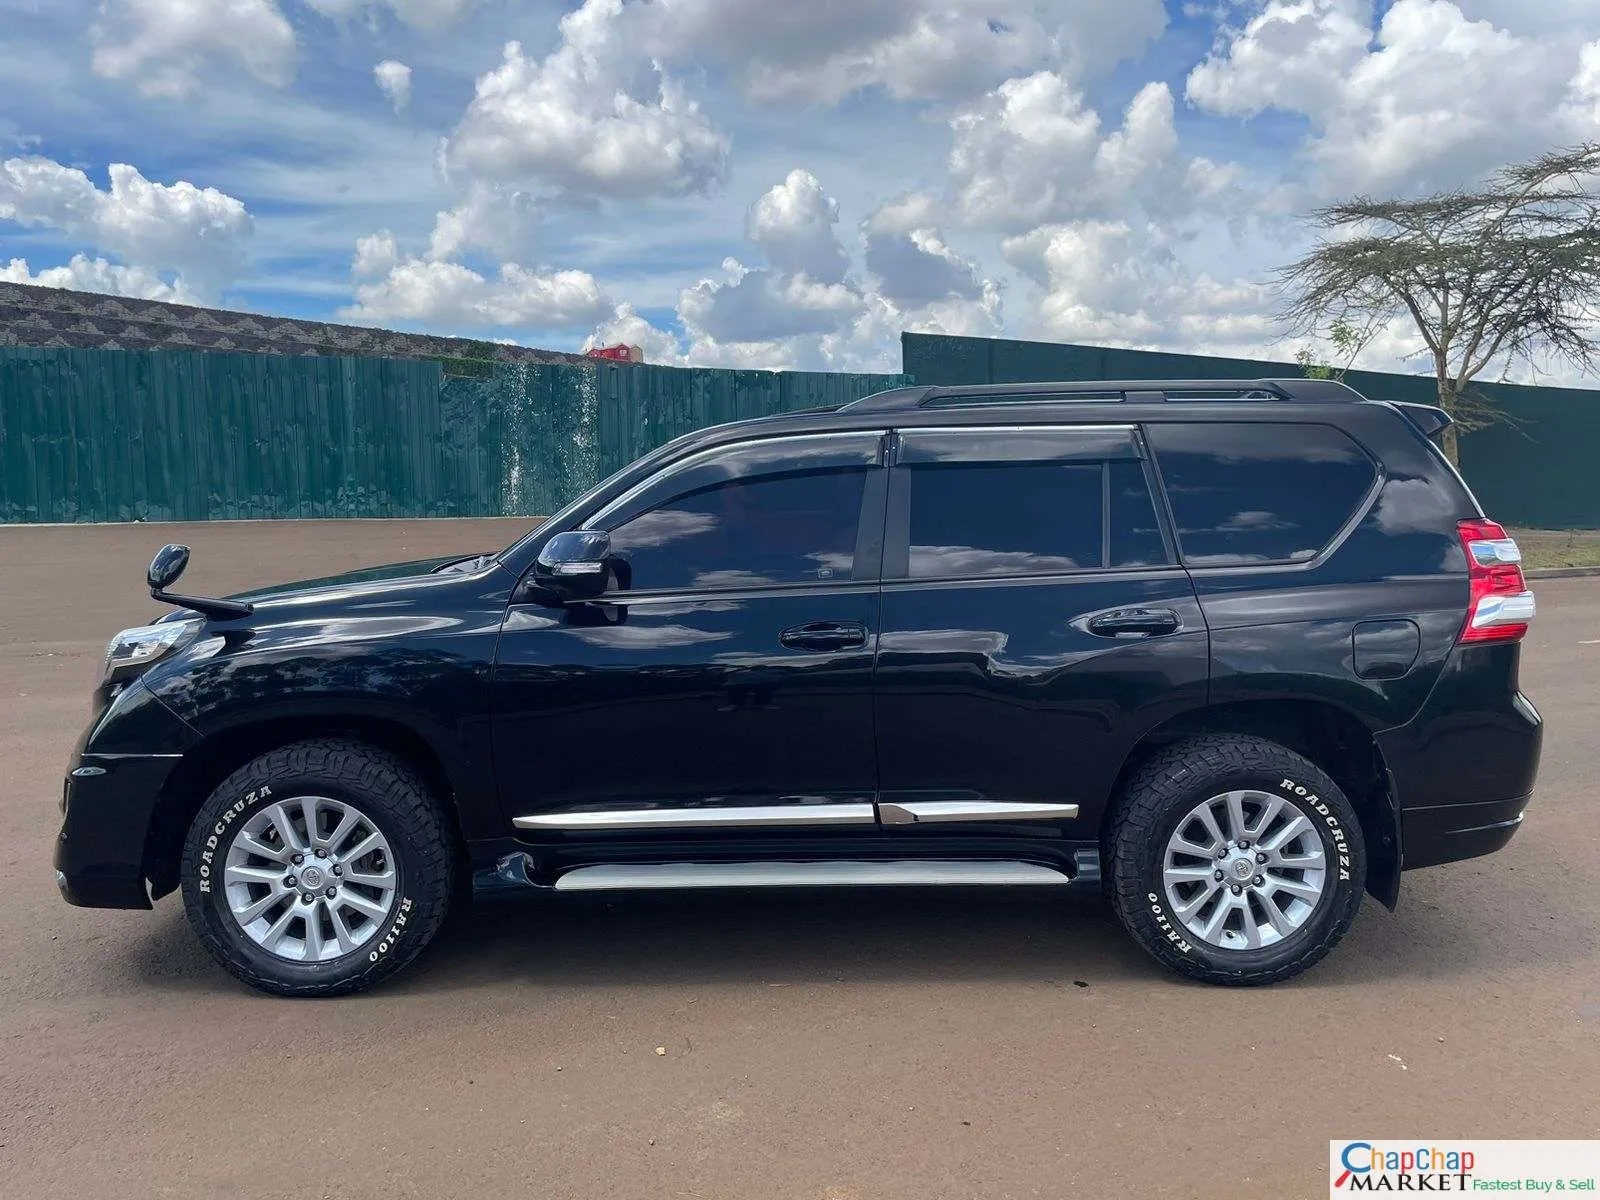 Cars For Sale Cars-Toyota Prado TZG QUICK SALE Fully loaded trade in Ok EXCLUSIVE Toyota Prado for sale in kenya hire purchase installments 2